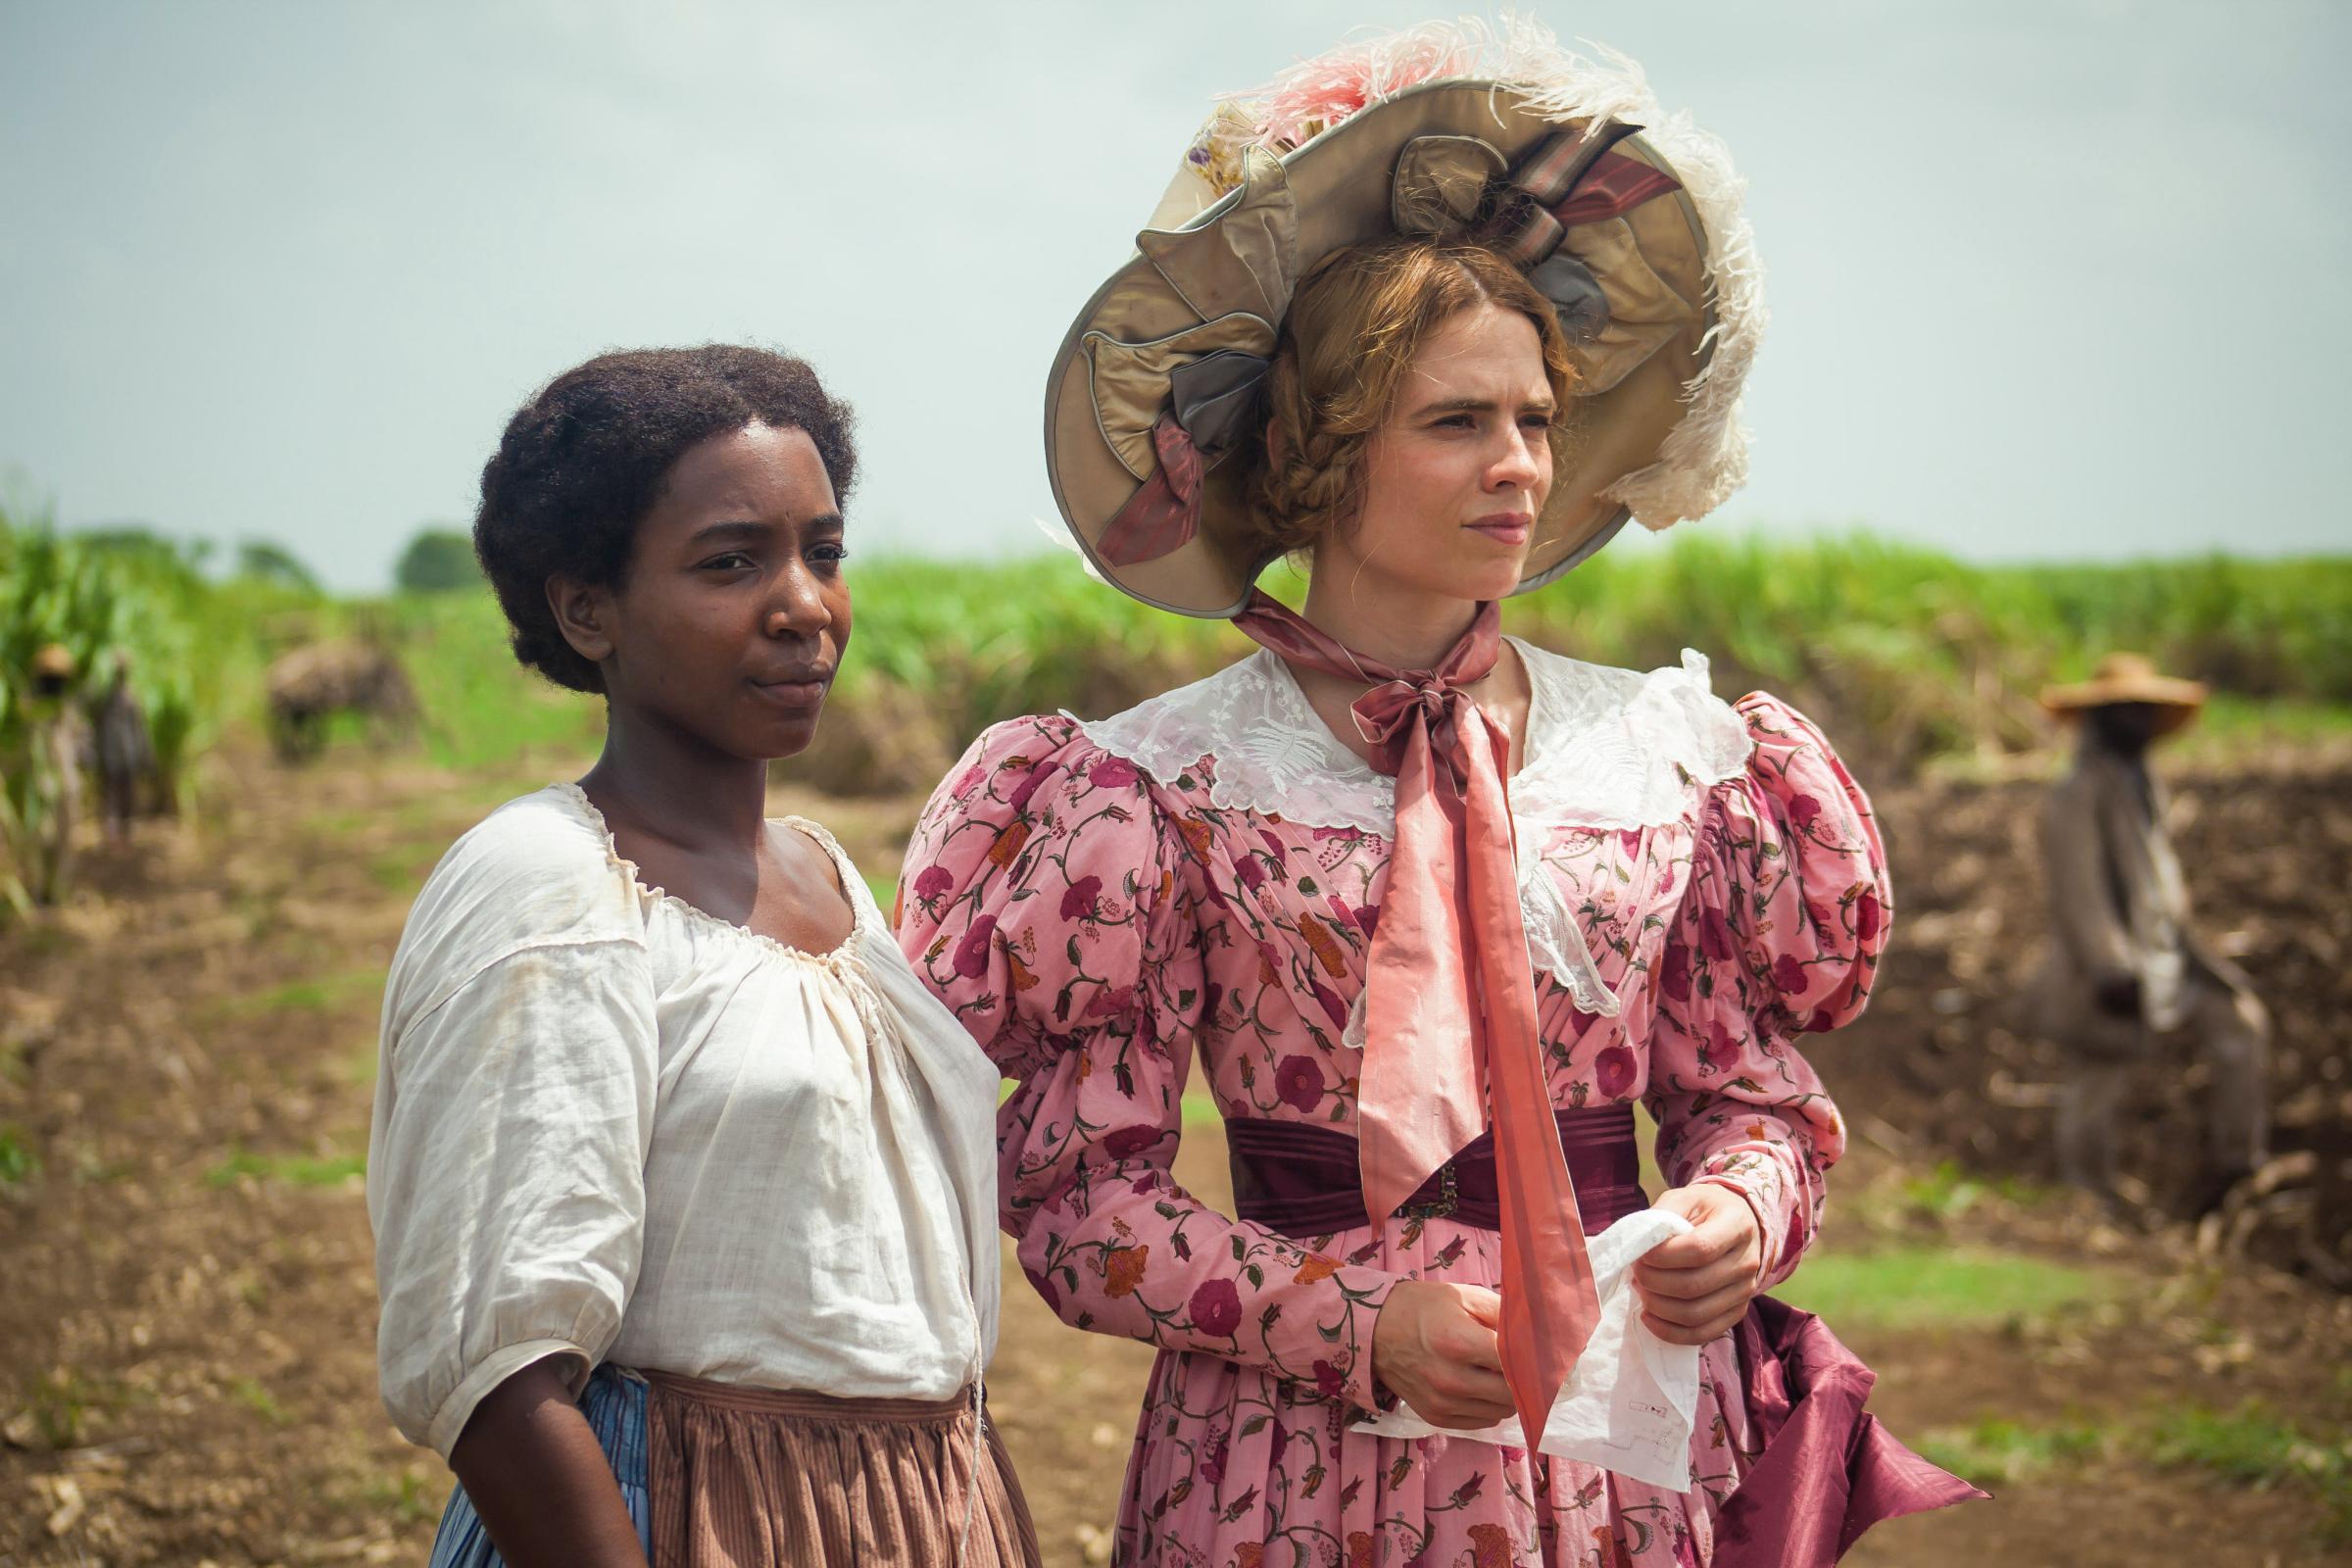 MASTERPIECE“The Long Song”Shown from left to right: July (TAMARA LAWRANCE) and Caroline (HAYLEY ATWELL) For editorial use only.(C) Heyday Television - Photographer: Carlos Rodriguez